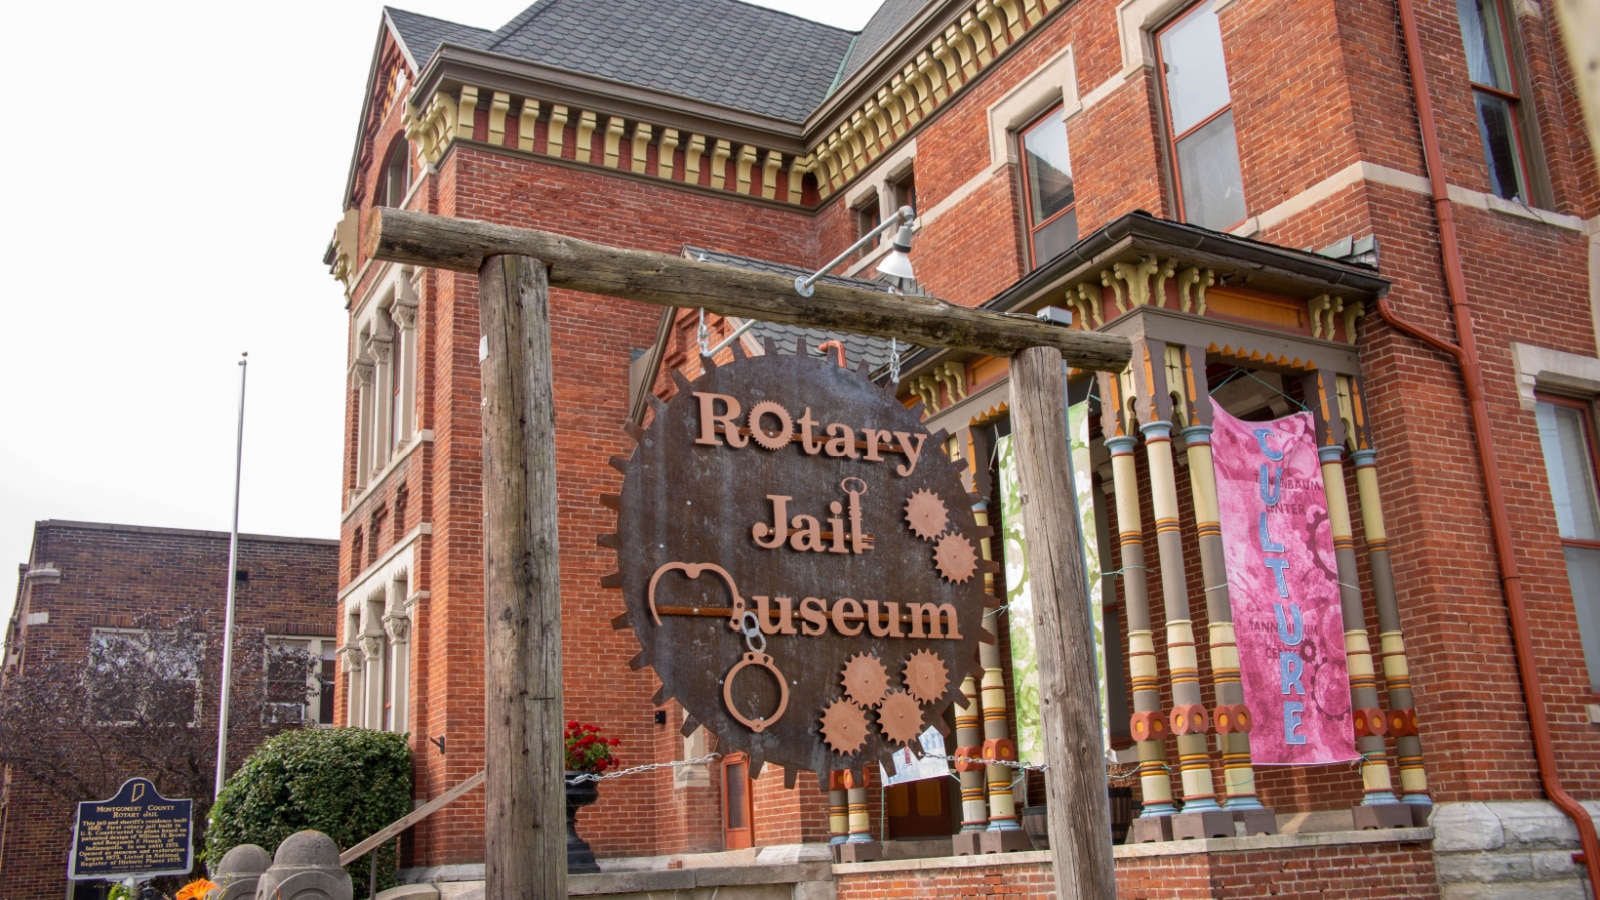 Crawfordsville, Indiana, USA - August 6, 2021 : Sign in front of the exterior of the Rotary Jail Museum in Crawfordsville, Indiana.